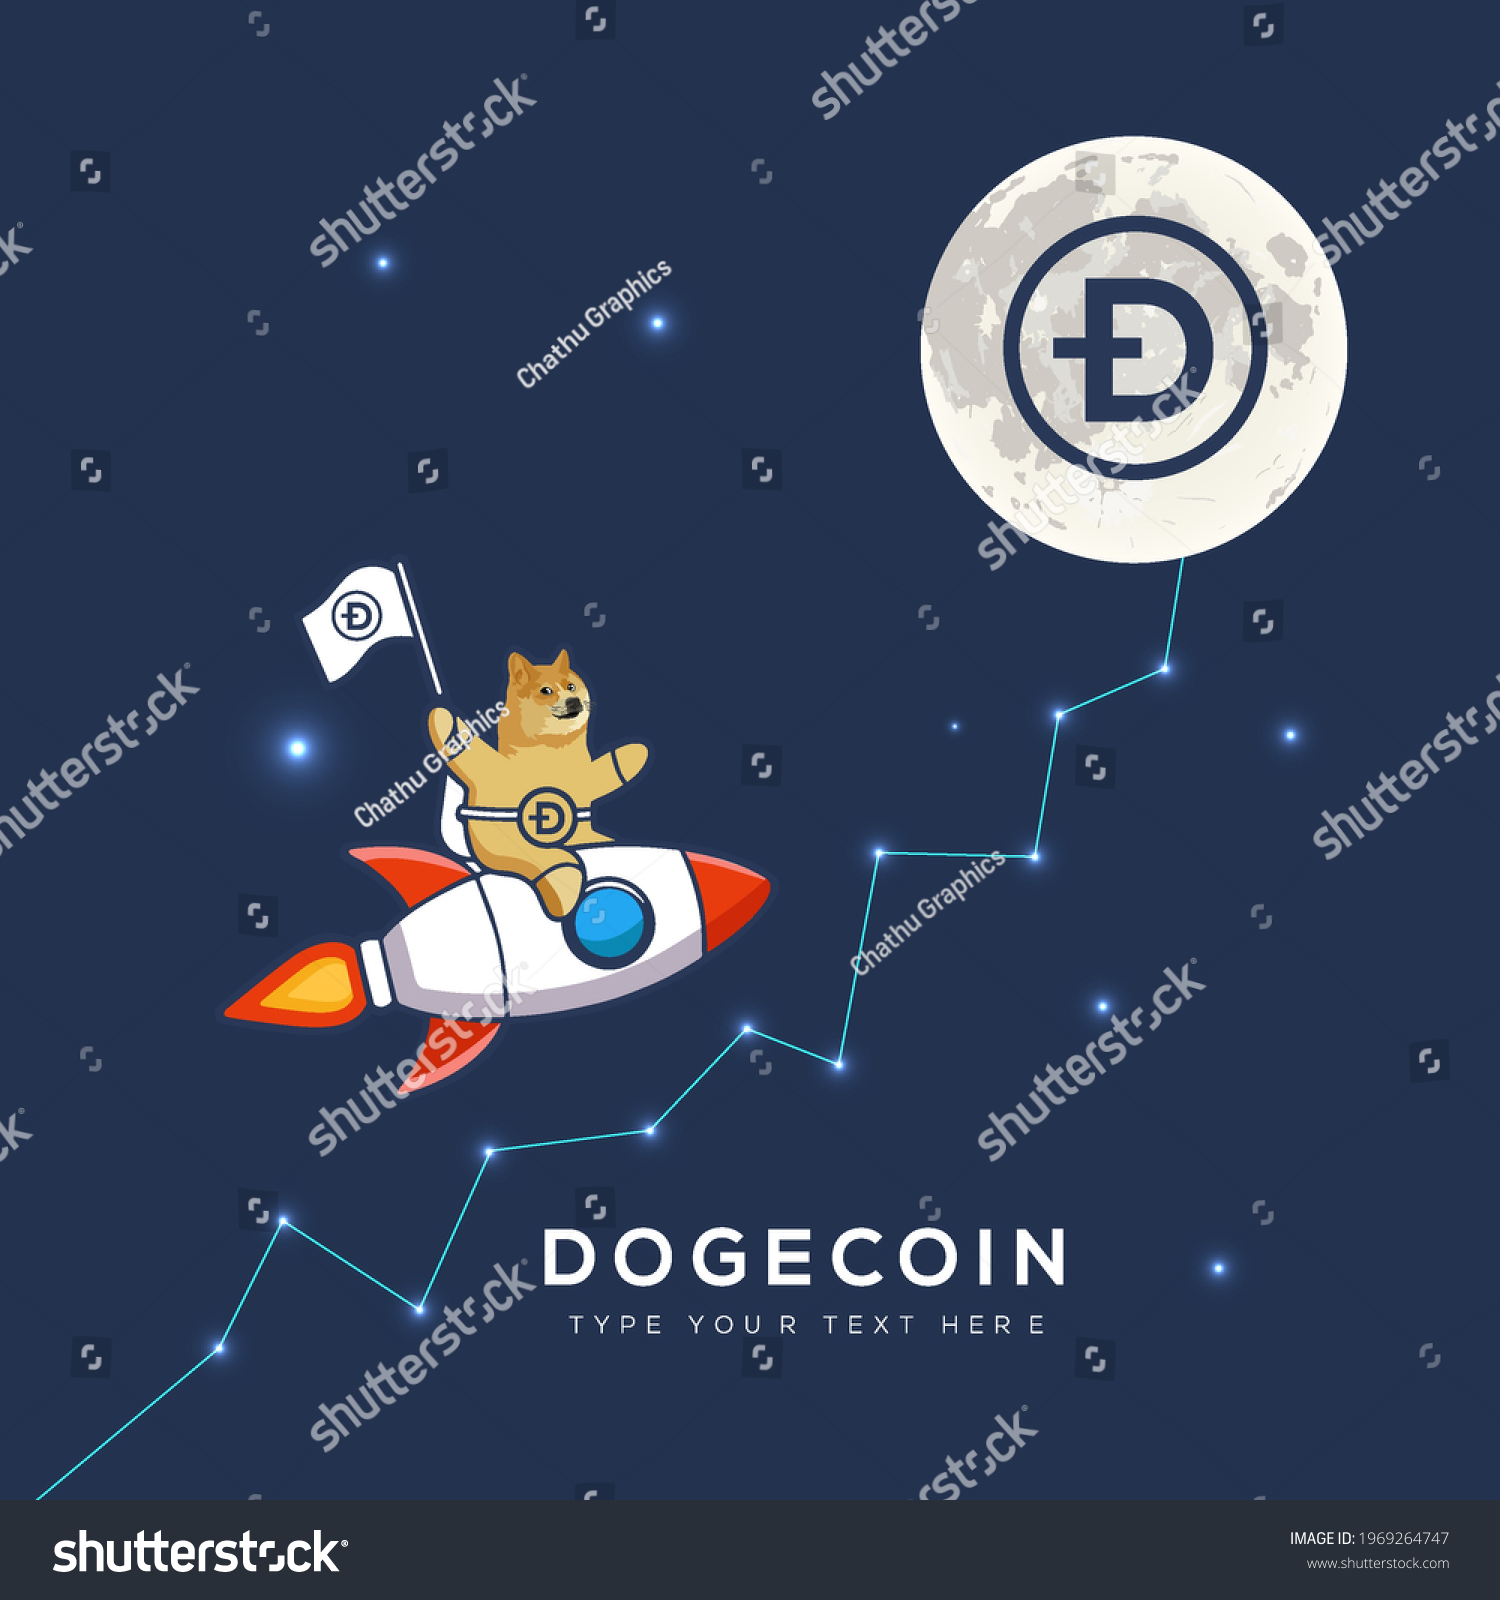 SVG of dogecoin going to the moon, cryptocurrency market, shiba inu meme, original vector illustration svg